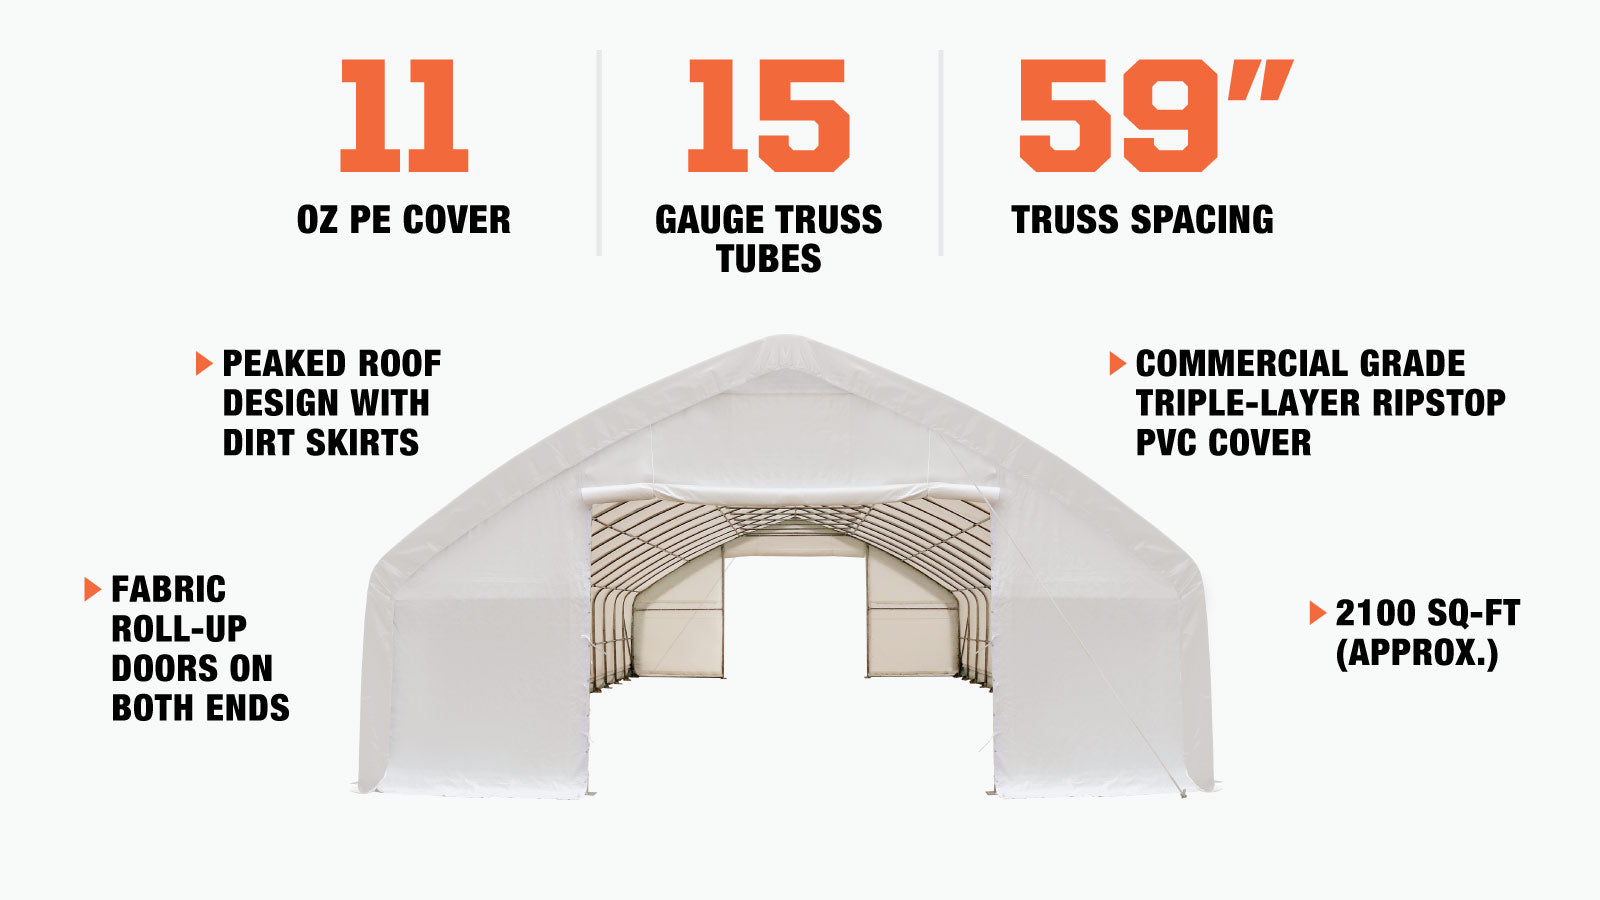 TMG Industrial 30' x 70' Straight Wall Peak Ceiling Storage Shelter with Heavy Duty 11 oz PE Cover & Drive Through Doors, TMG-ST3070E(Previously ST3070)-description-image